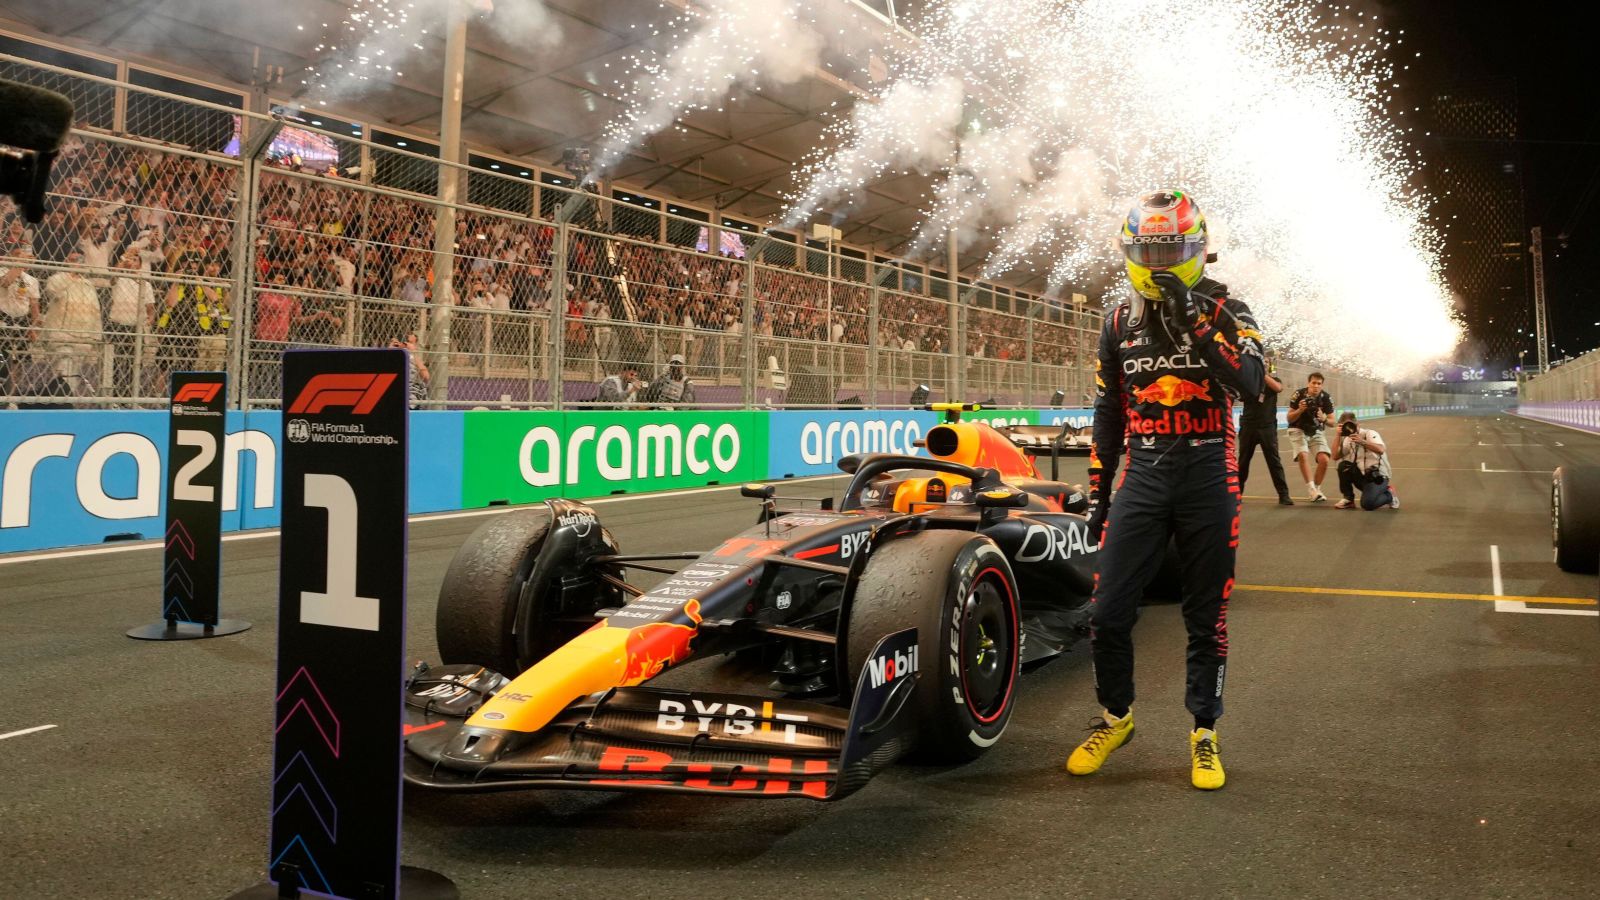 Christian Horner explains why Sergio Perez had his best performance in Jeddah